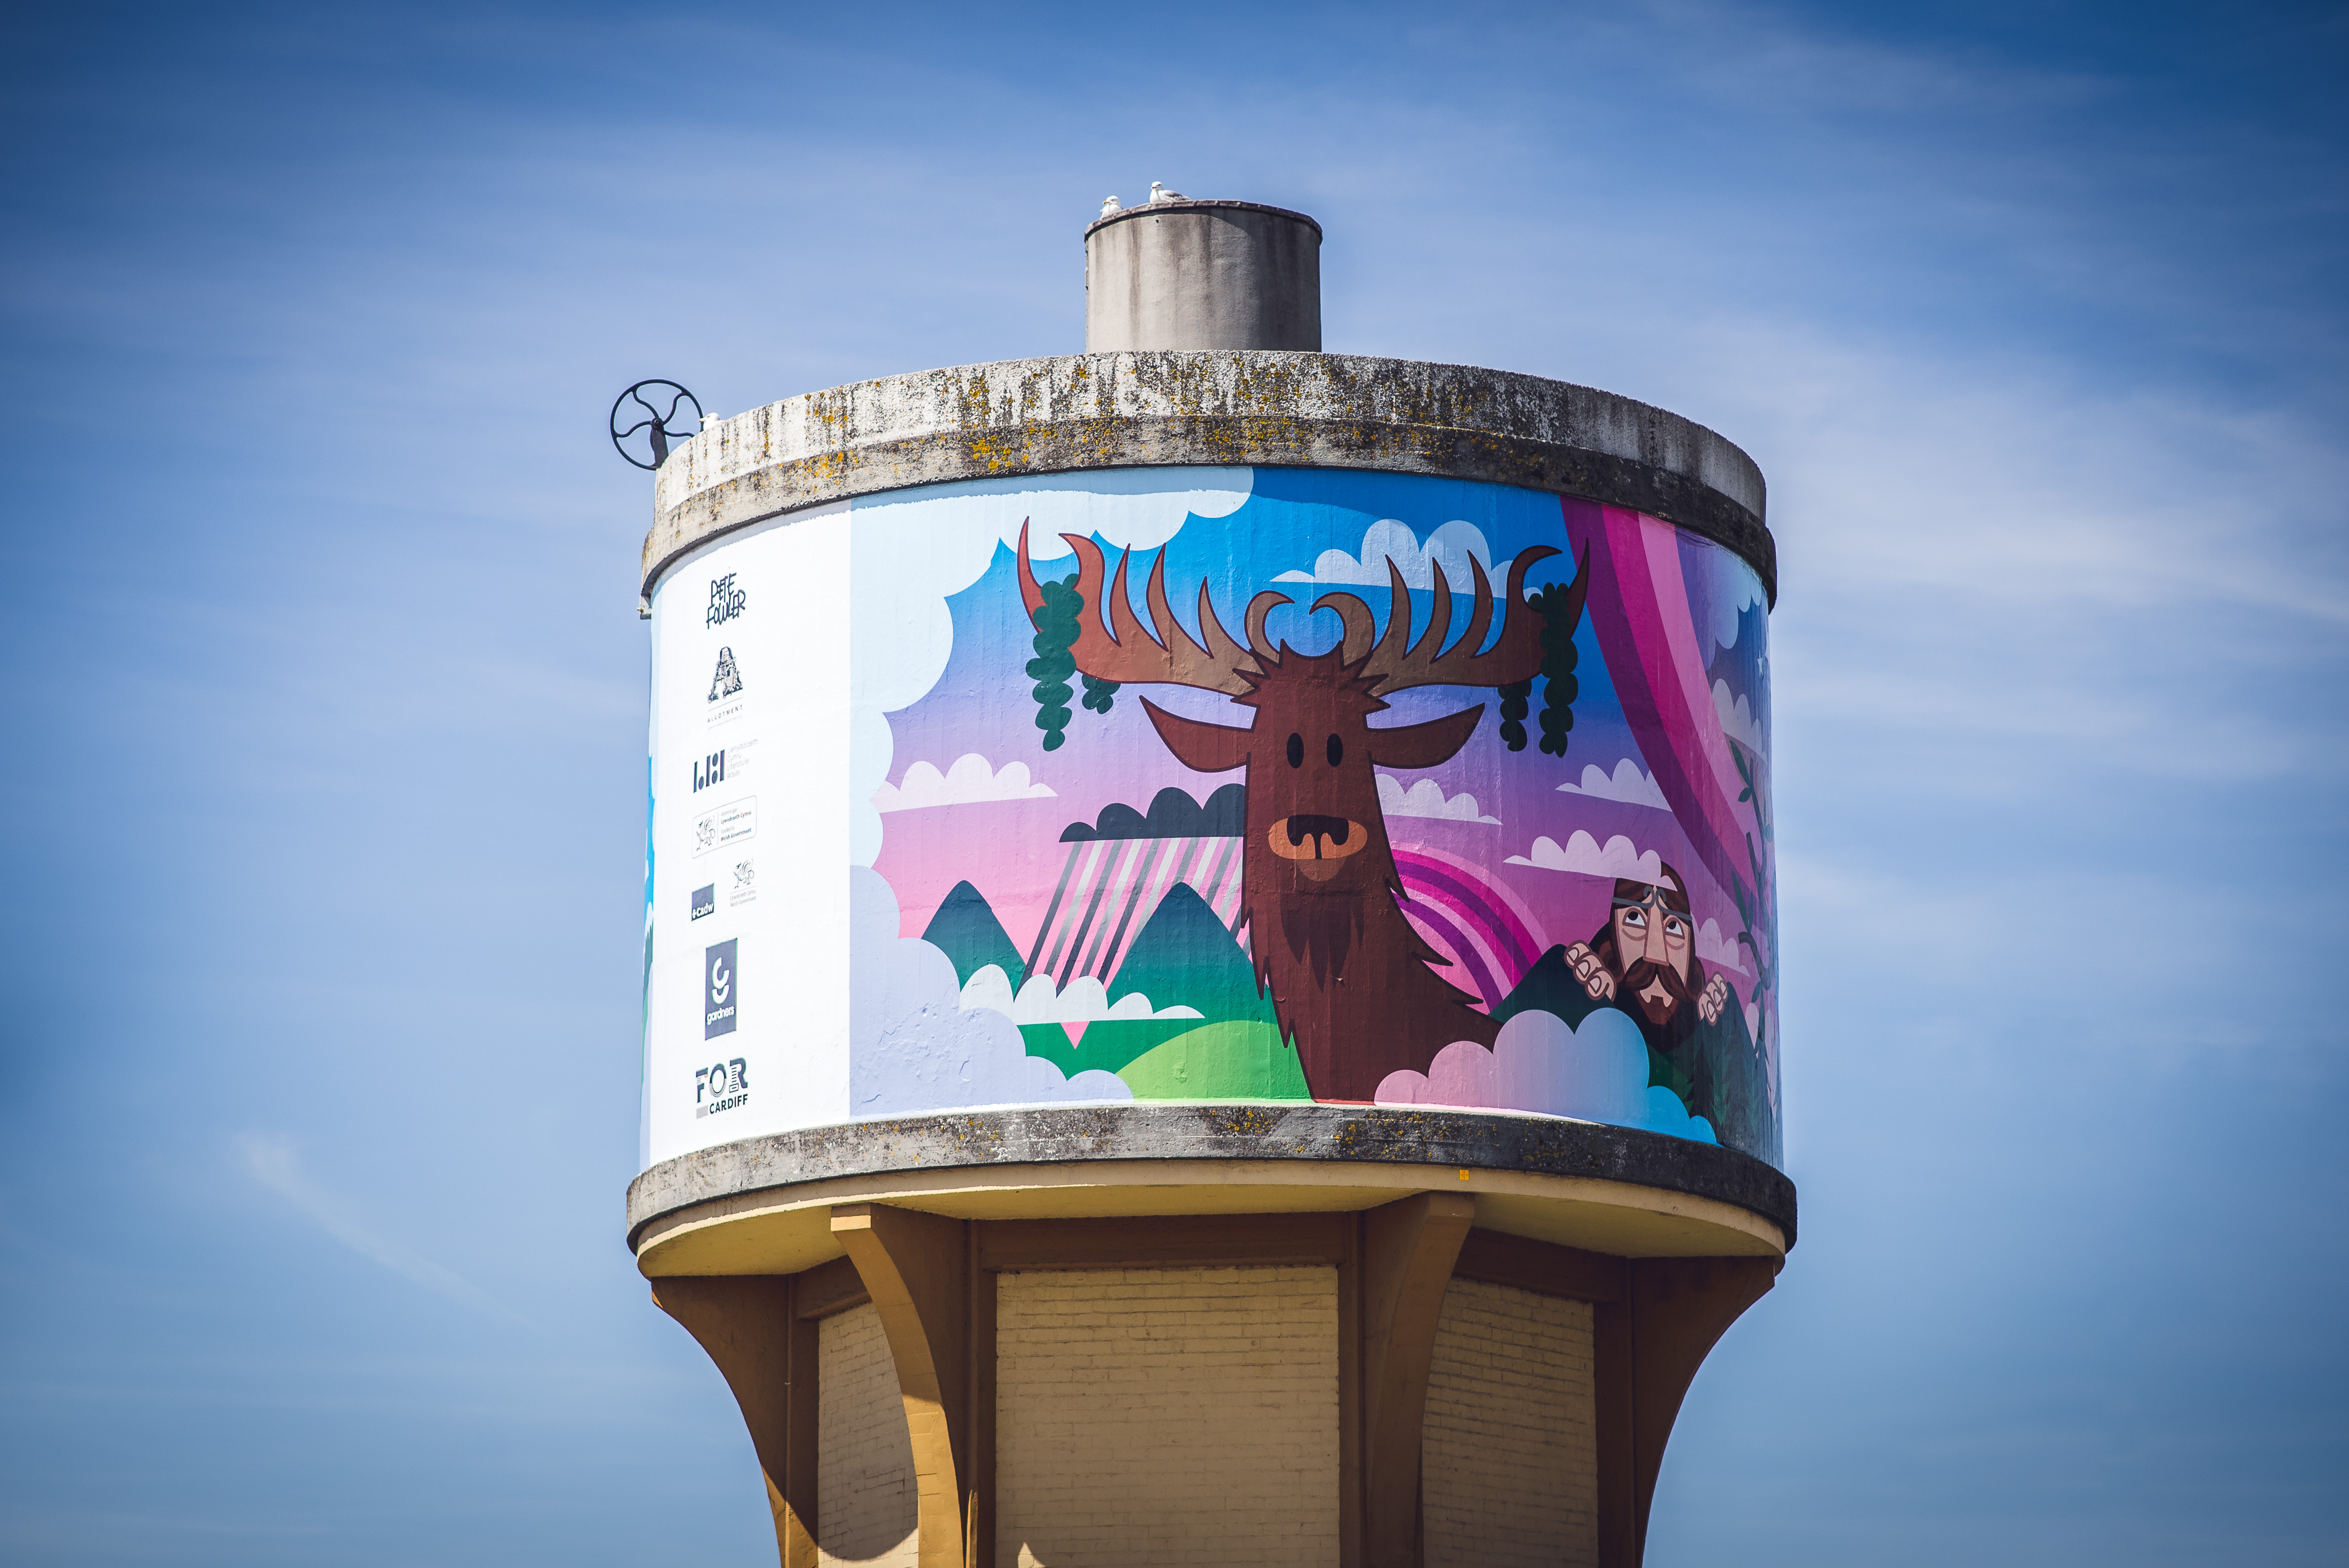 Pete Fowler's water tower